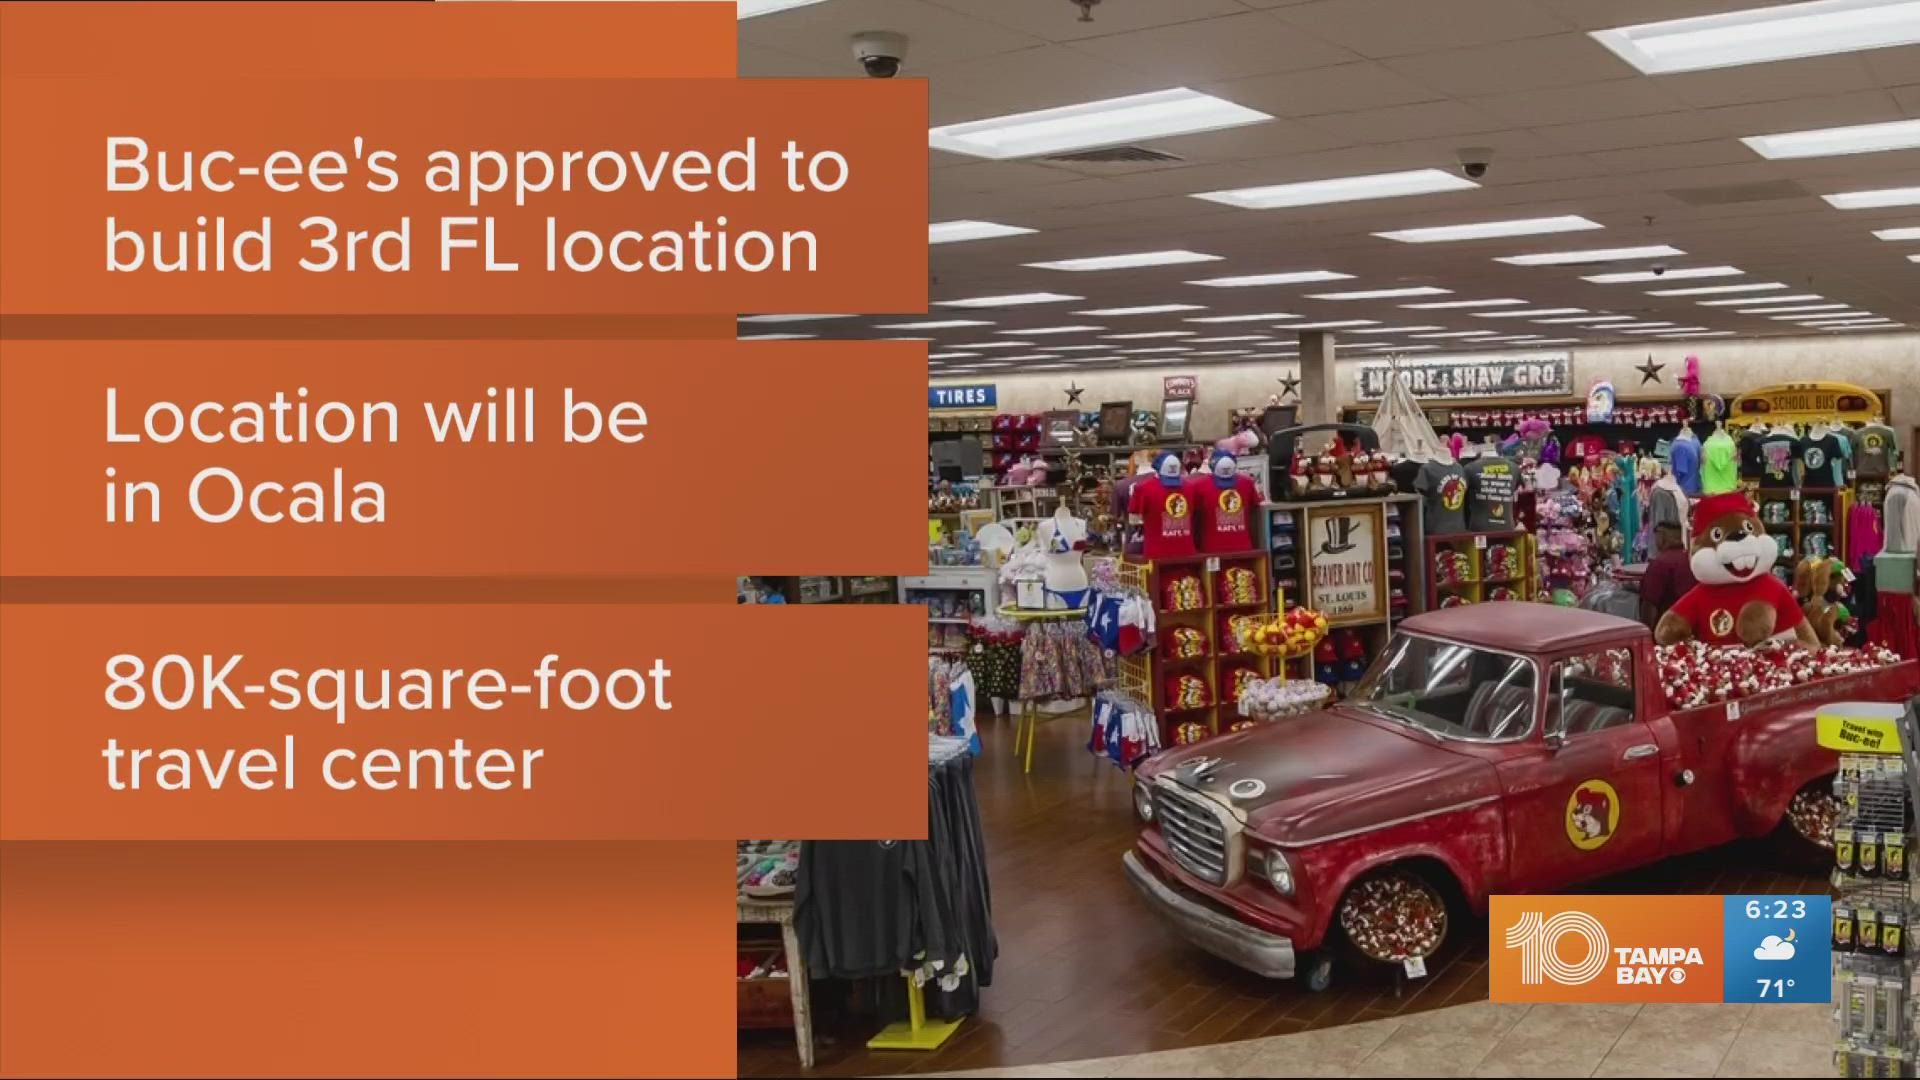 The fan-favorite gas station company was approved by Marion County leaders to build a 32-acre location in Ocala.